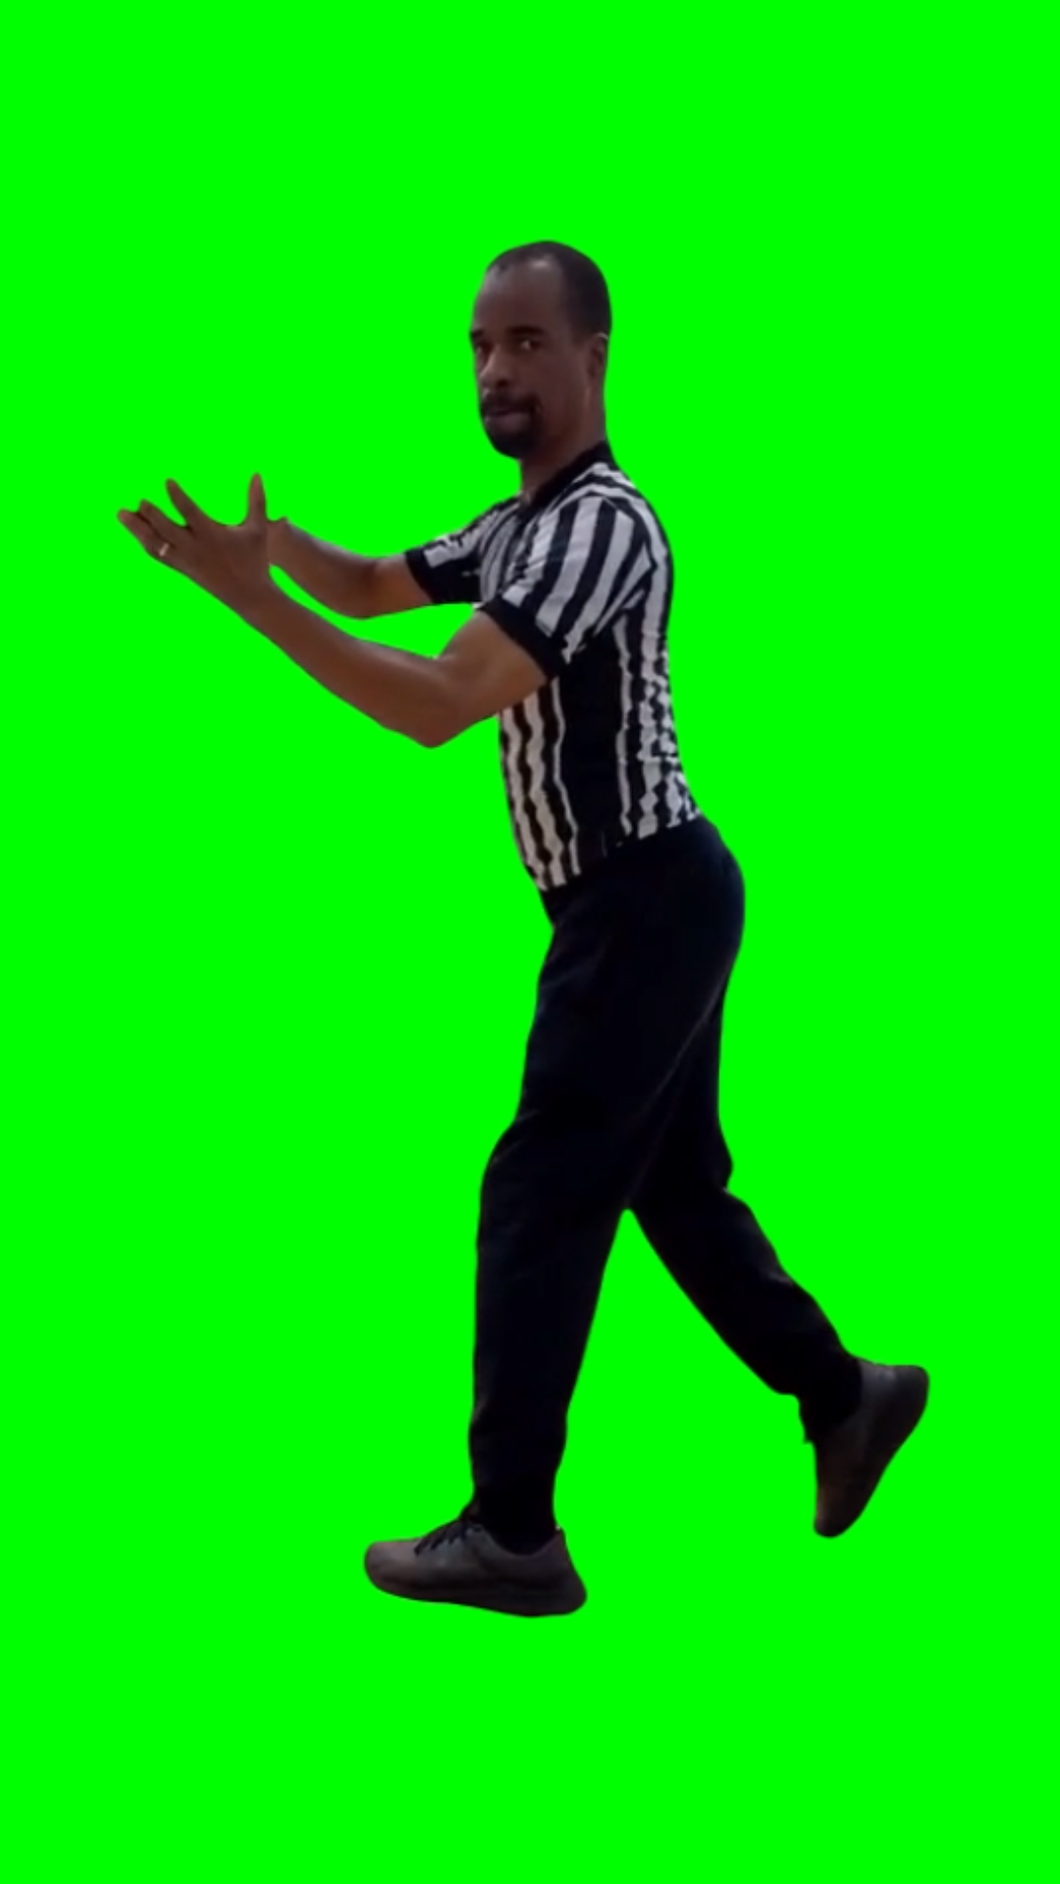 Referee catches basketball - without basketball (Green Screen)